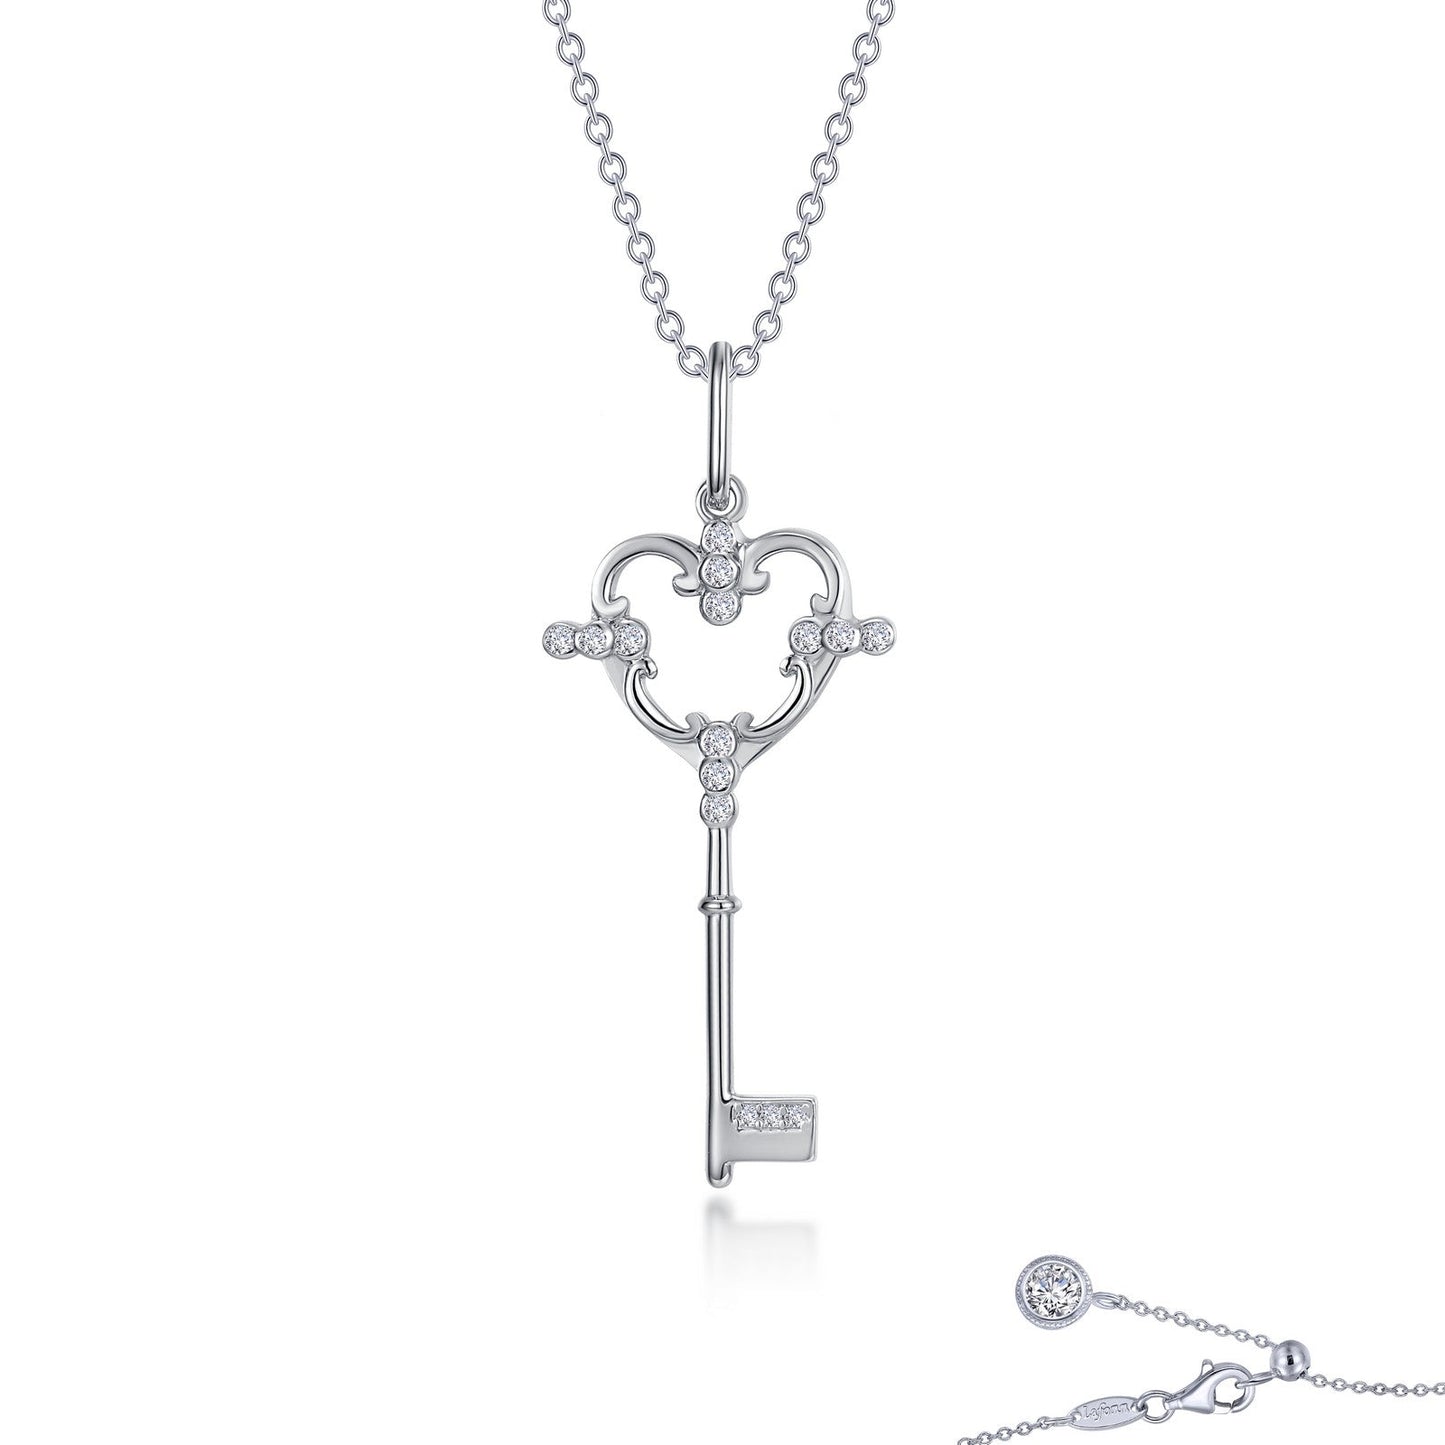 Lafonn Key to My Heart Necklace Simulated Diamond NECKLACES Platinum 0.4 CTS Approx. 32.2mm (H) x 13.5mm (W)